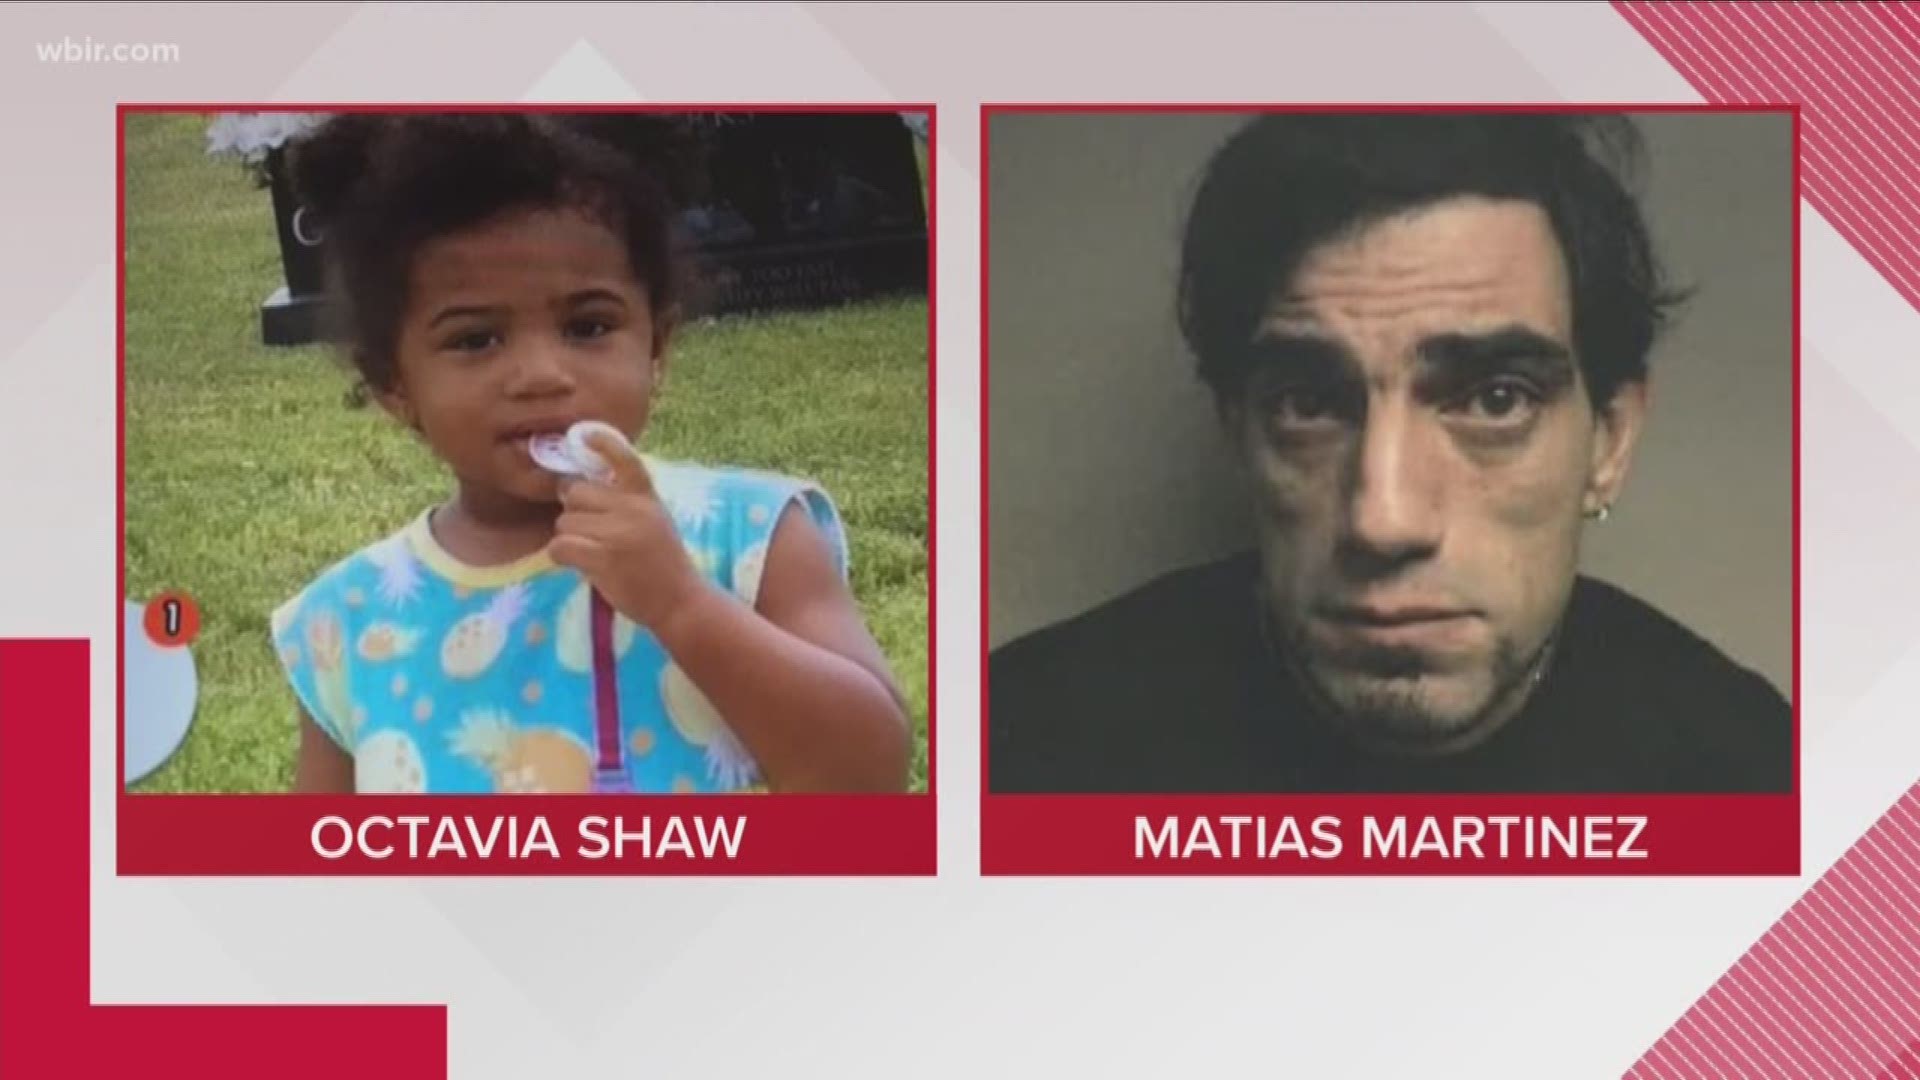 The TBI says a Chattanooga toddler at the center of an AMBER Alert has now been found safe. The TBI says 37-year-old Matias Martinez is in custody and facing charges. According to authorities--someone spotted Martinez and the 23-month old girl in the area where they disappeared.